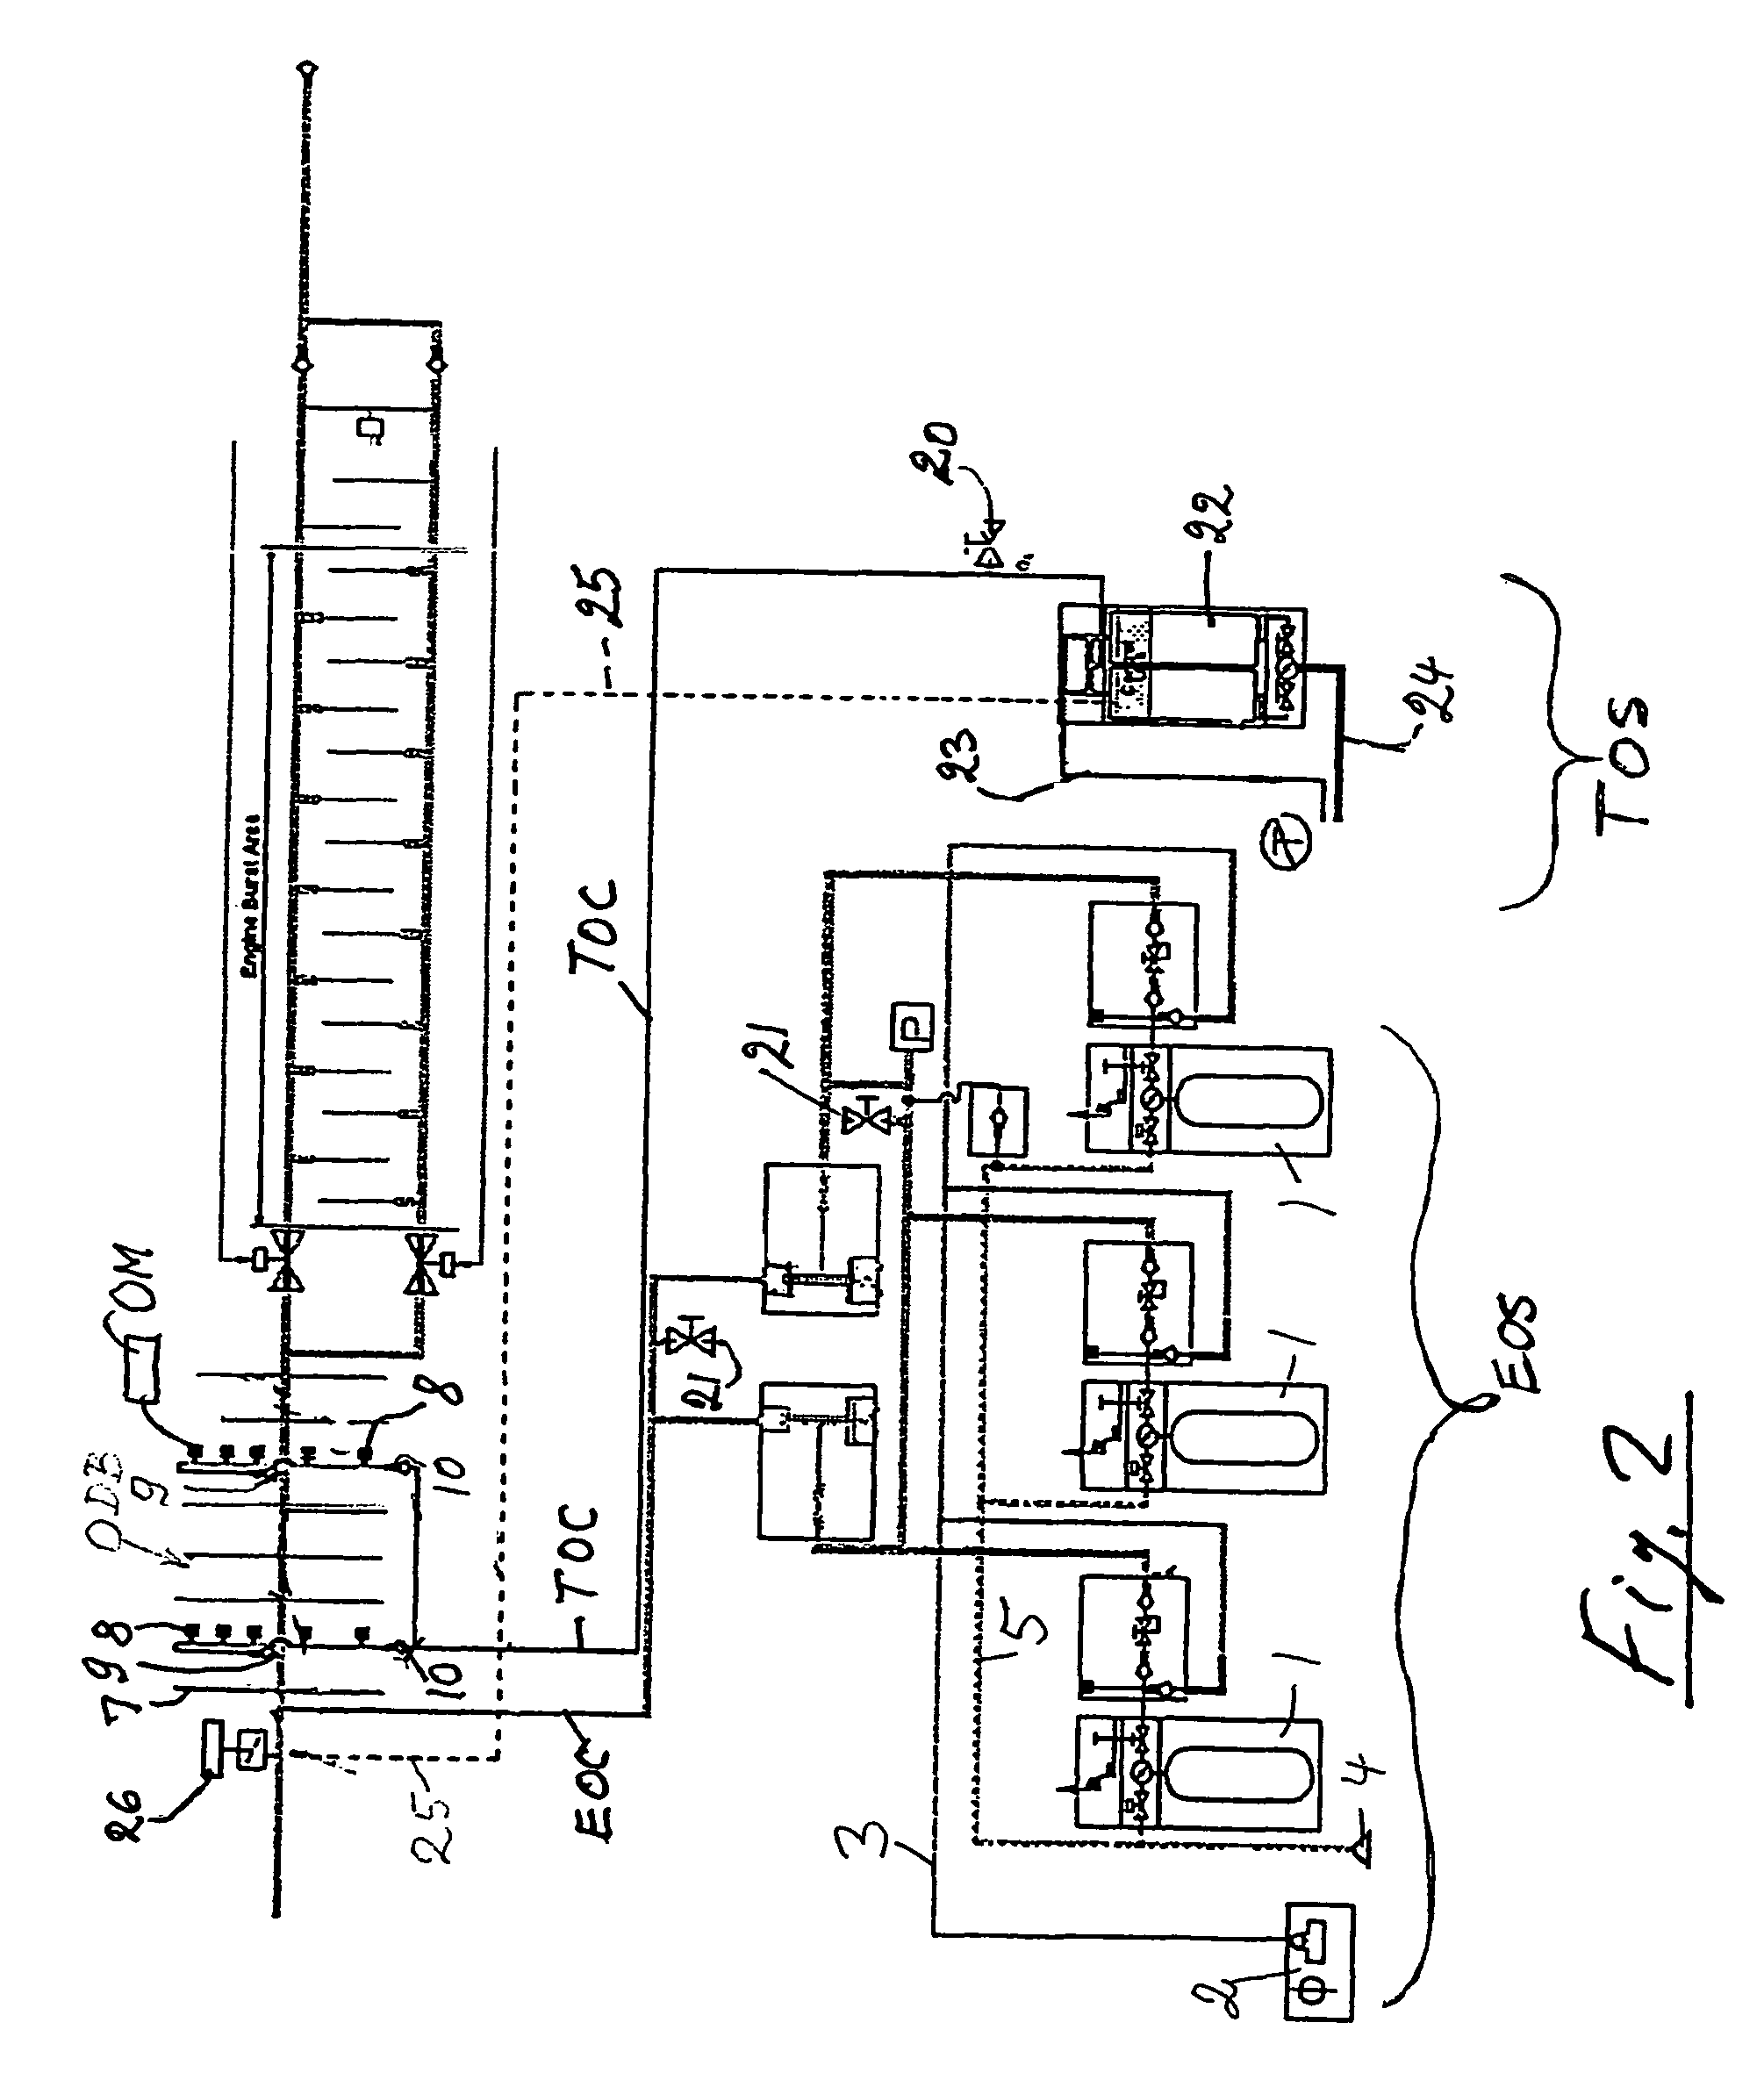 Oxygen supply and distribution system for a passenger aircraft